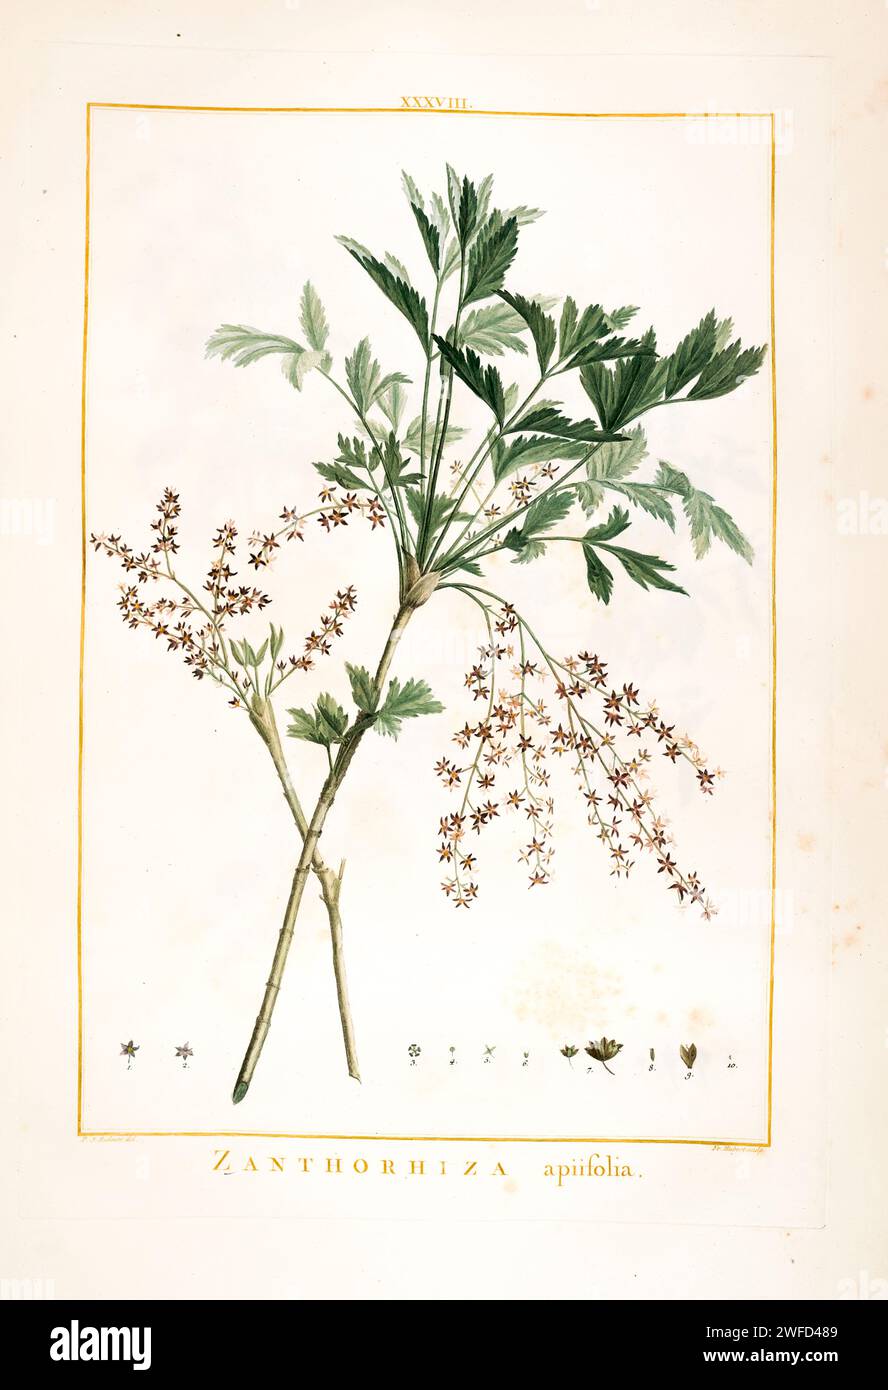 Xanthorhiza apiifolia [here as Zanthorhiza apiifolia] yellow root Shrubs Hand Painted by Pierre-Joseph Redouté and published in Stirpes Novae aut Minus Cognitae (1784) by Charles Louis L'Héritier de Brutelle. Stock Photo